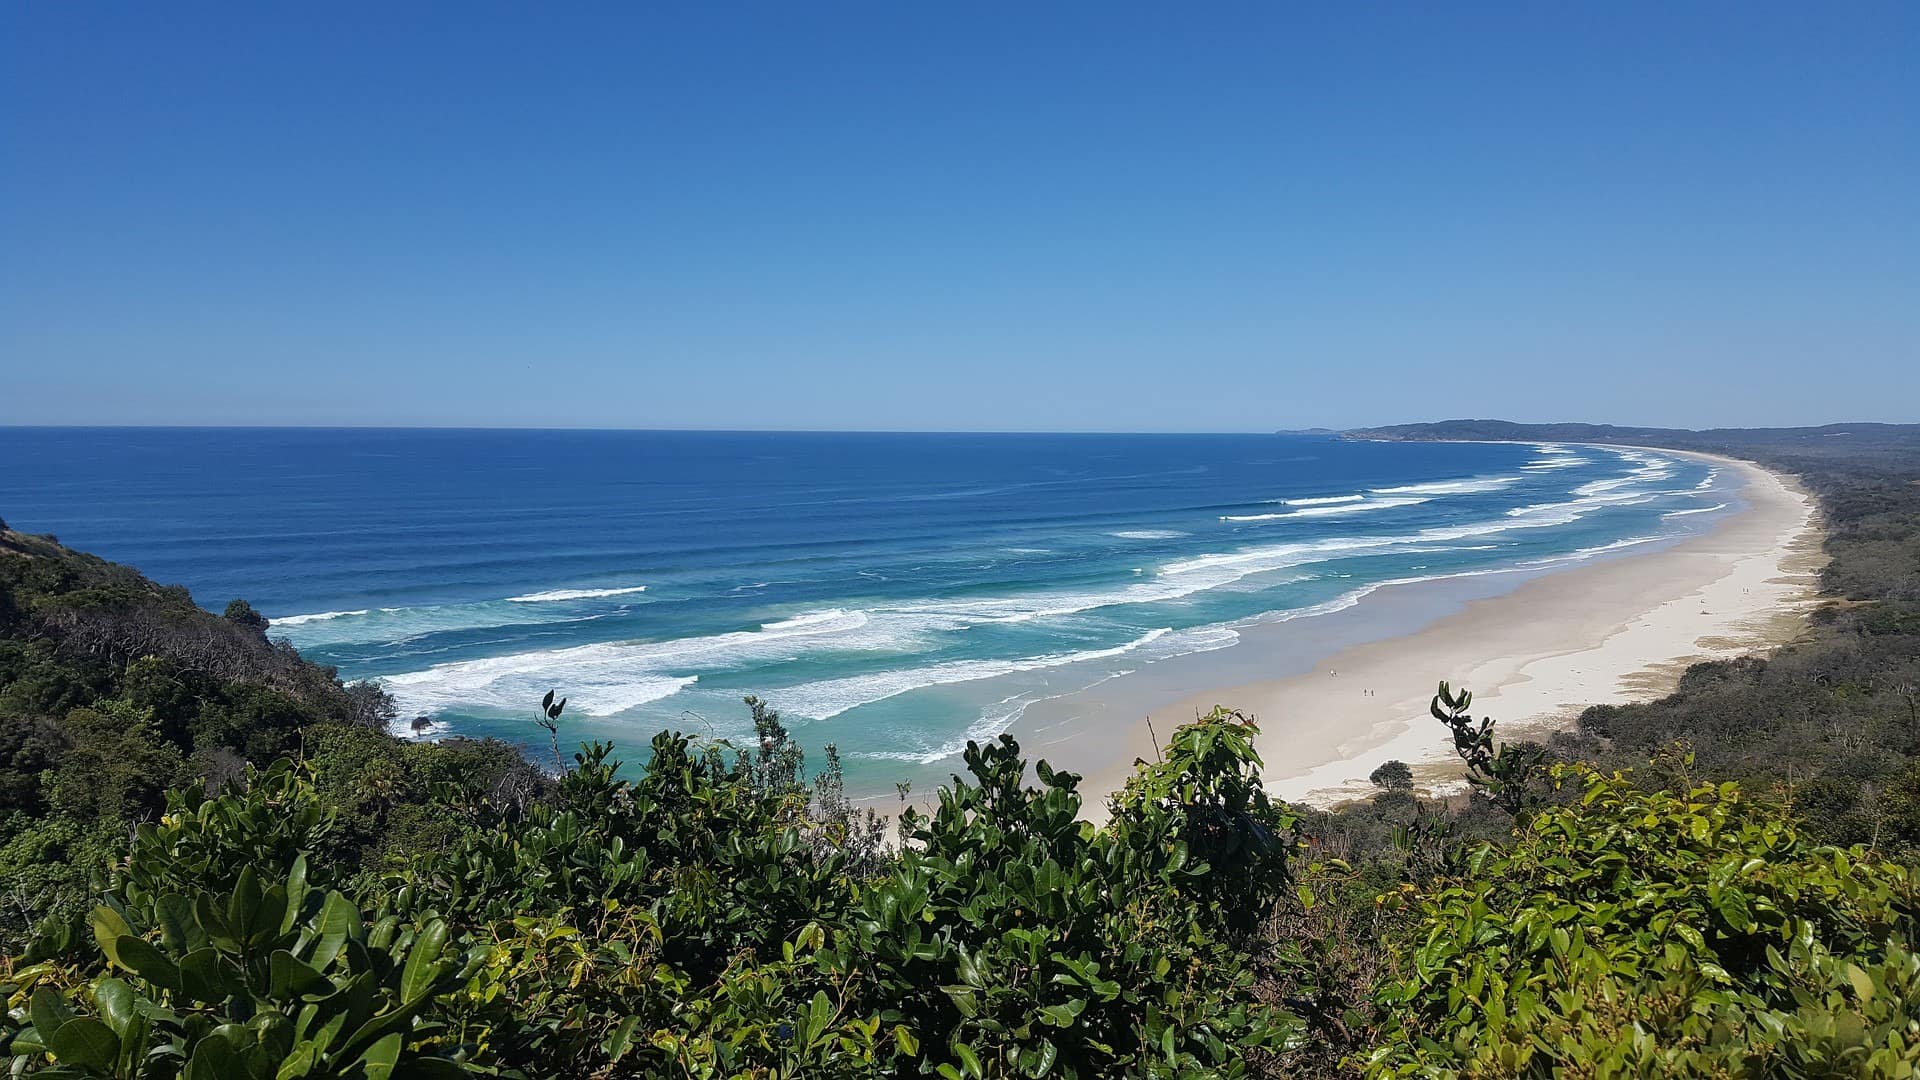 Plan your trip with Byron Bay holiday rentals